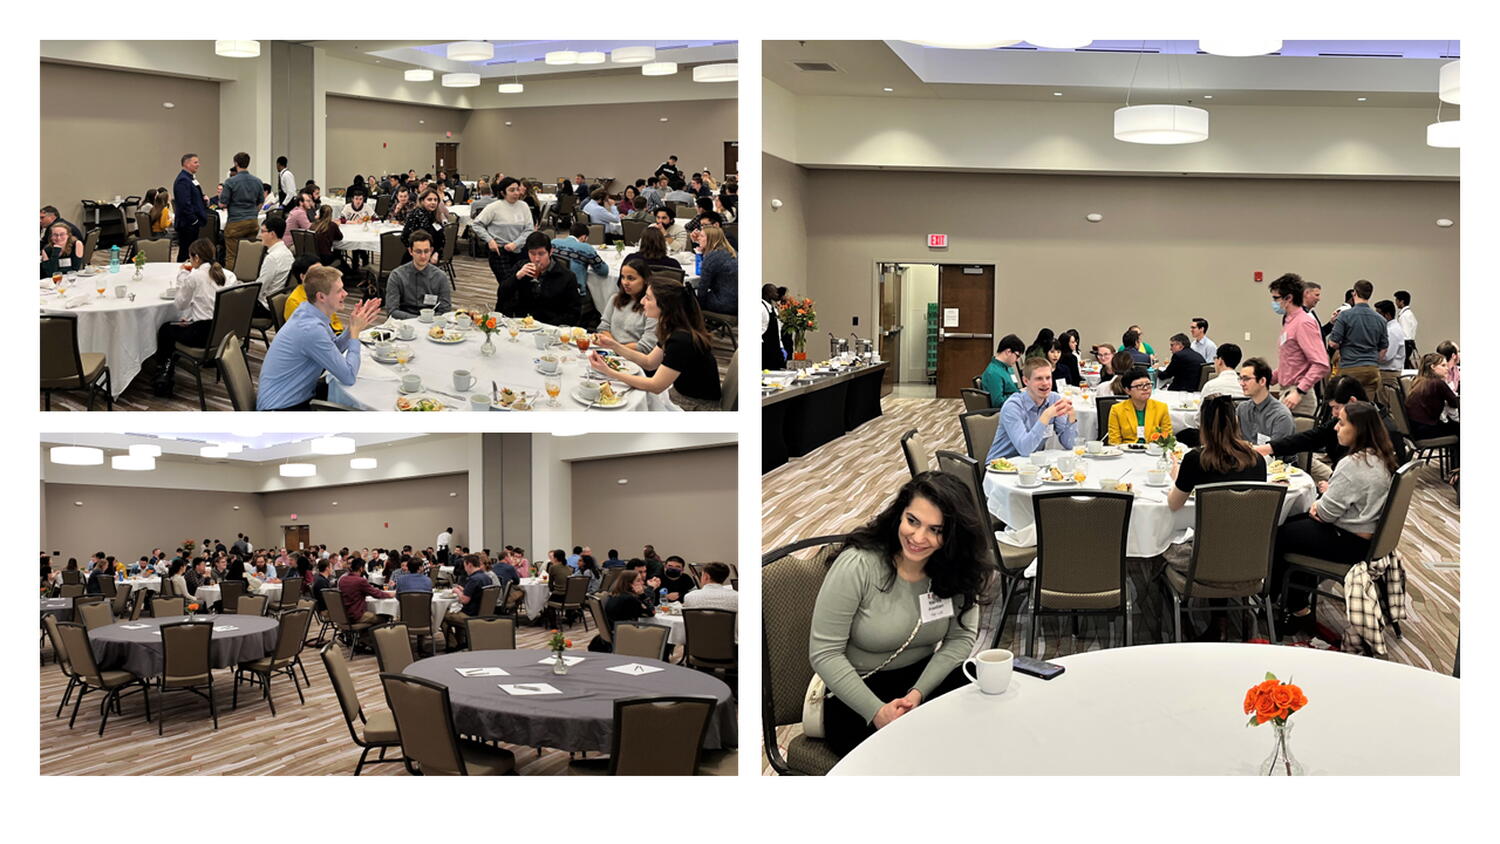 Three photos showing event participants sitting at round tables in a large room enjoying lunch and networking.